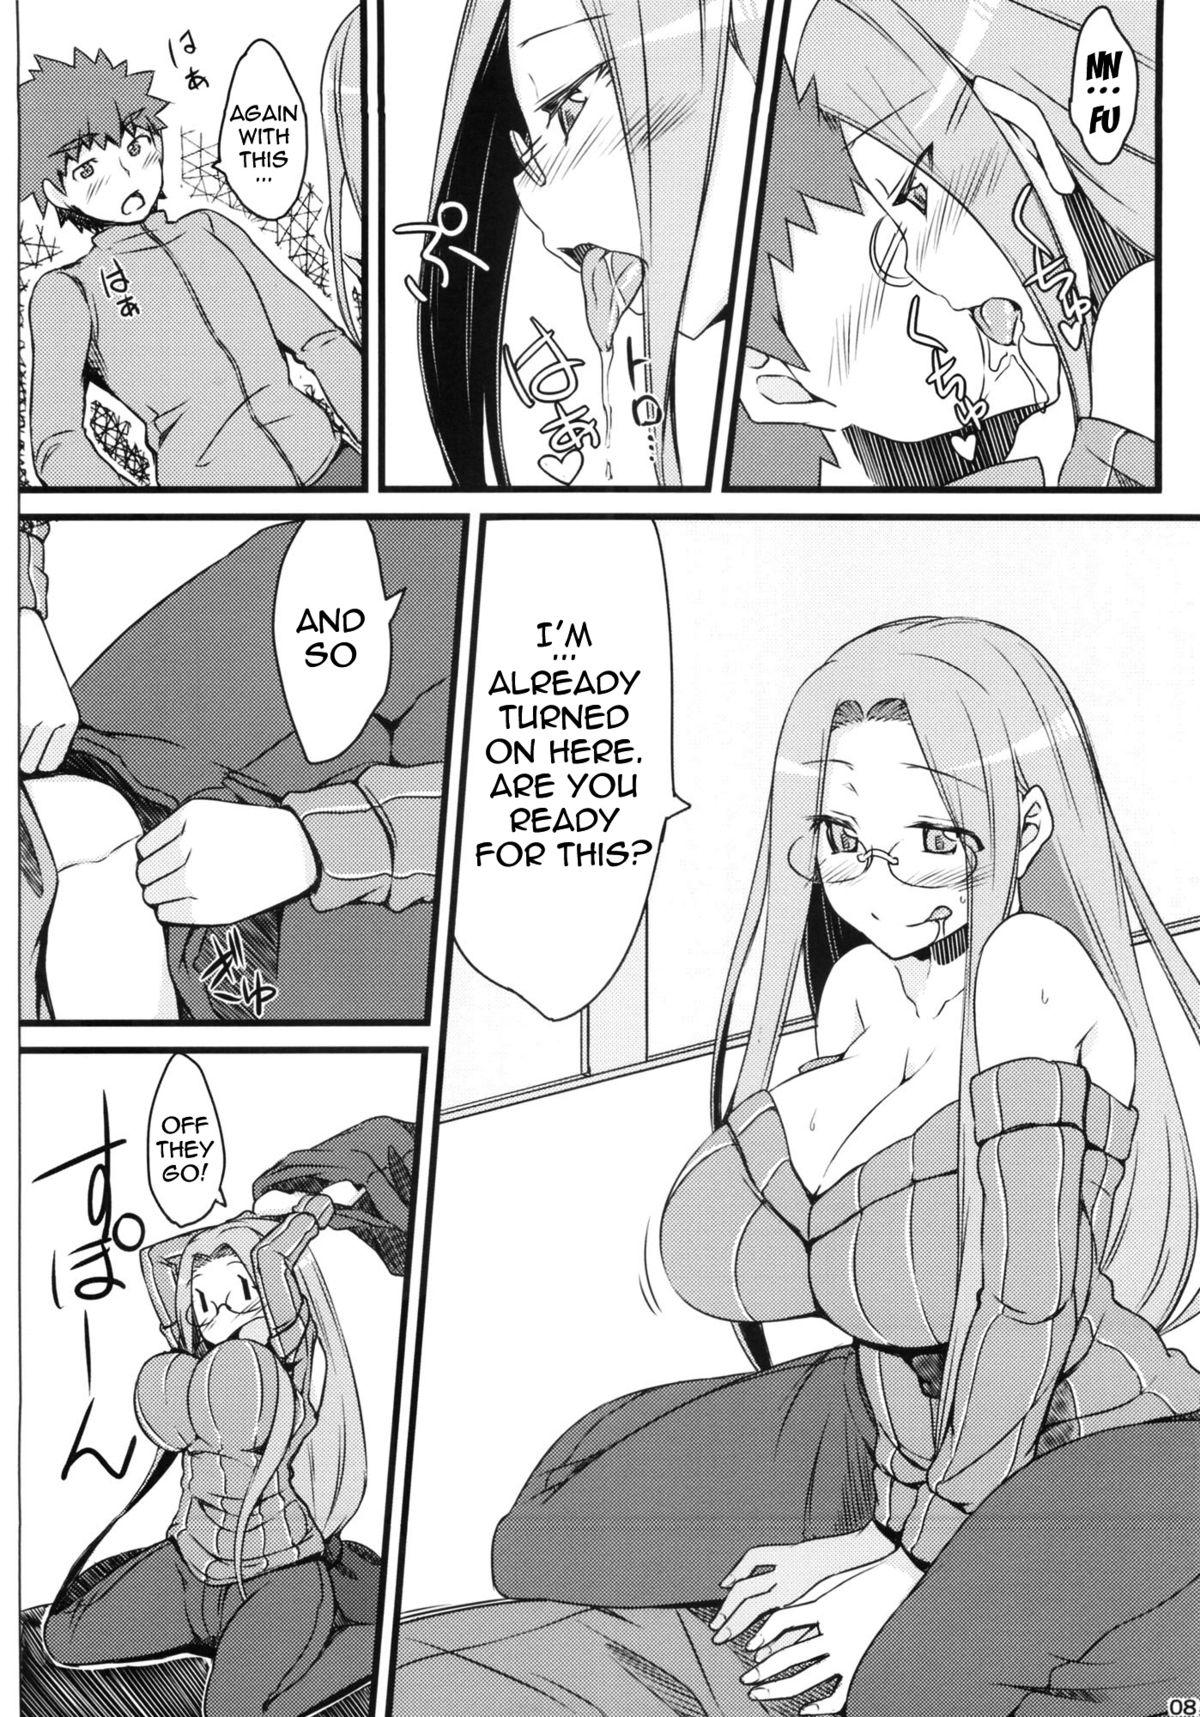 Mms R9 - Fate hollow ataraxia Compilation - Page 7